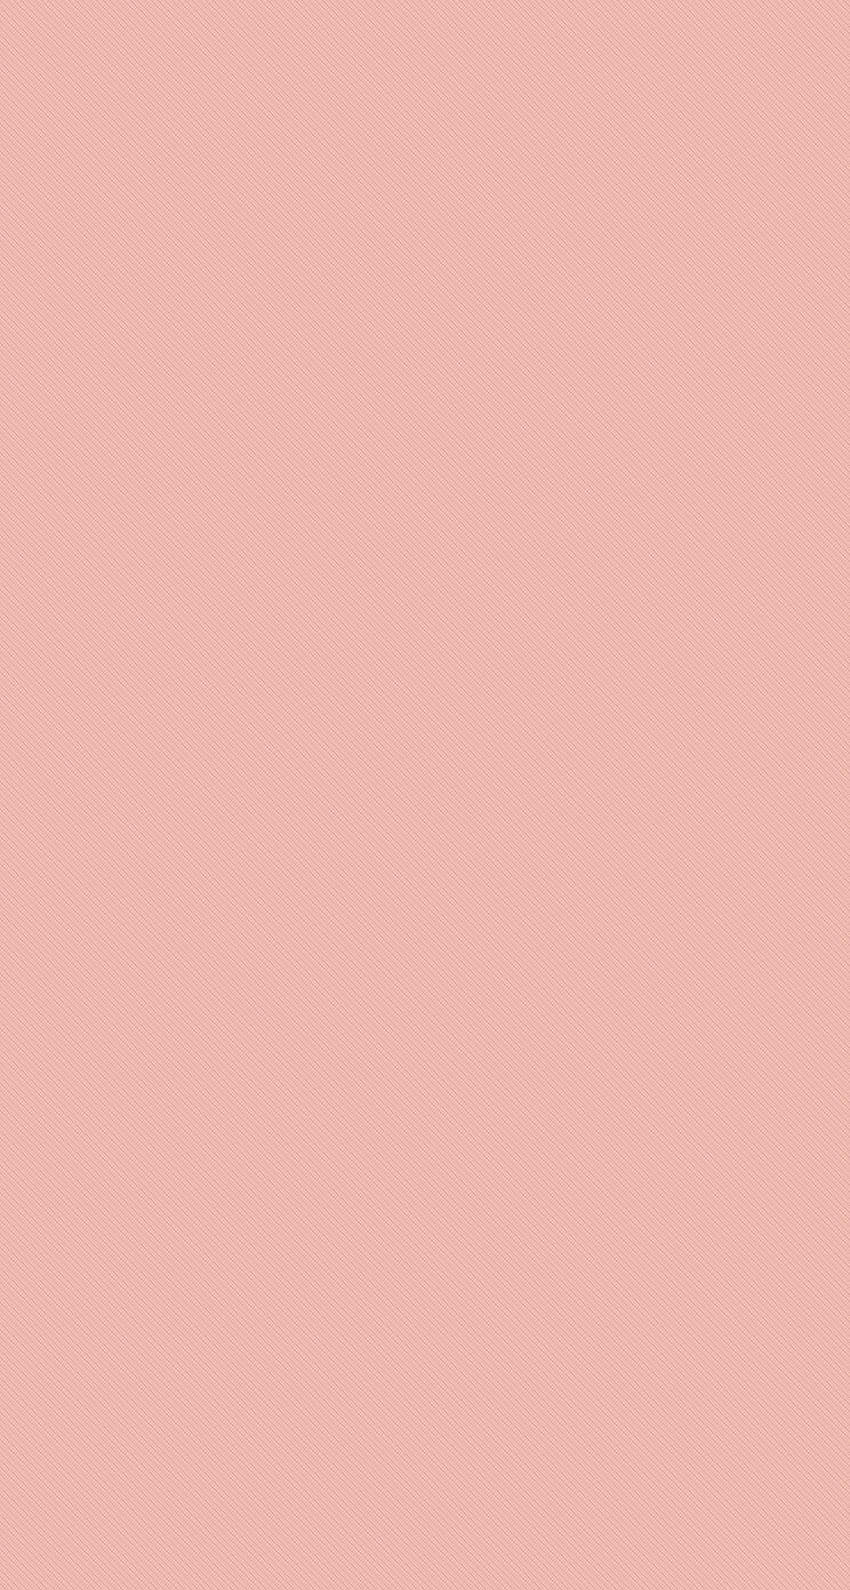 Pin en Harry Potter. Color iphone, Pink background, Pastel color, Solid Gray Pastel HD phone wallpaper